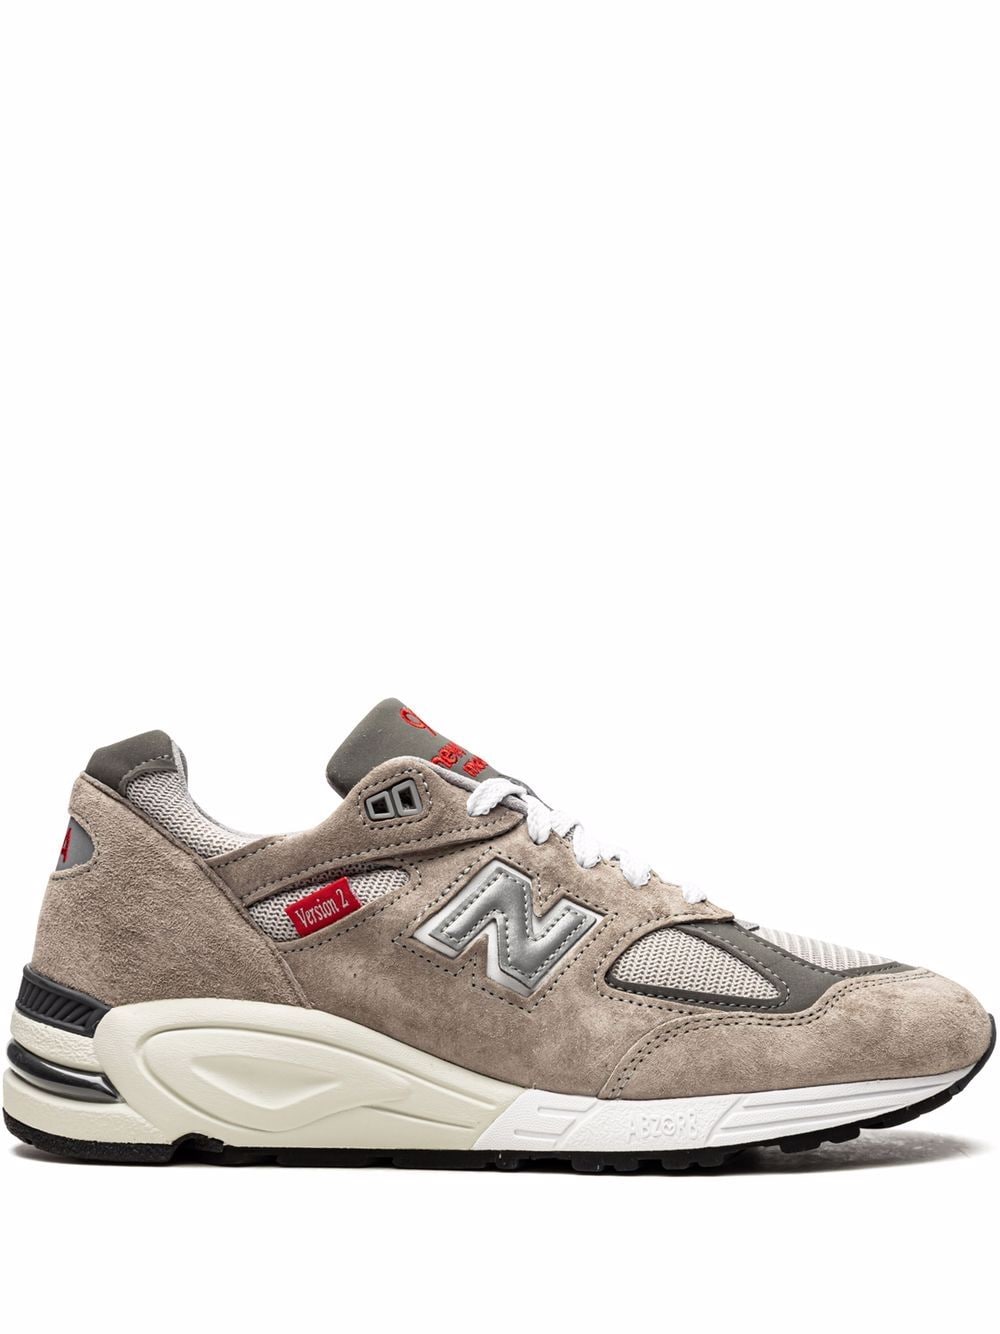 New Balance Made in US 990 v2 sneakers - Grijs